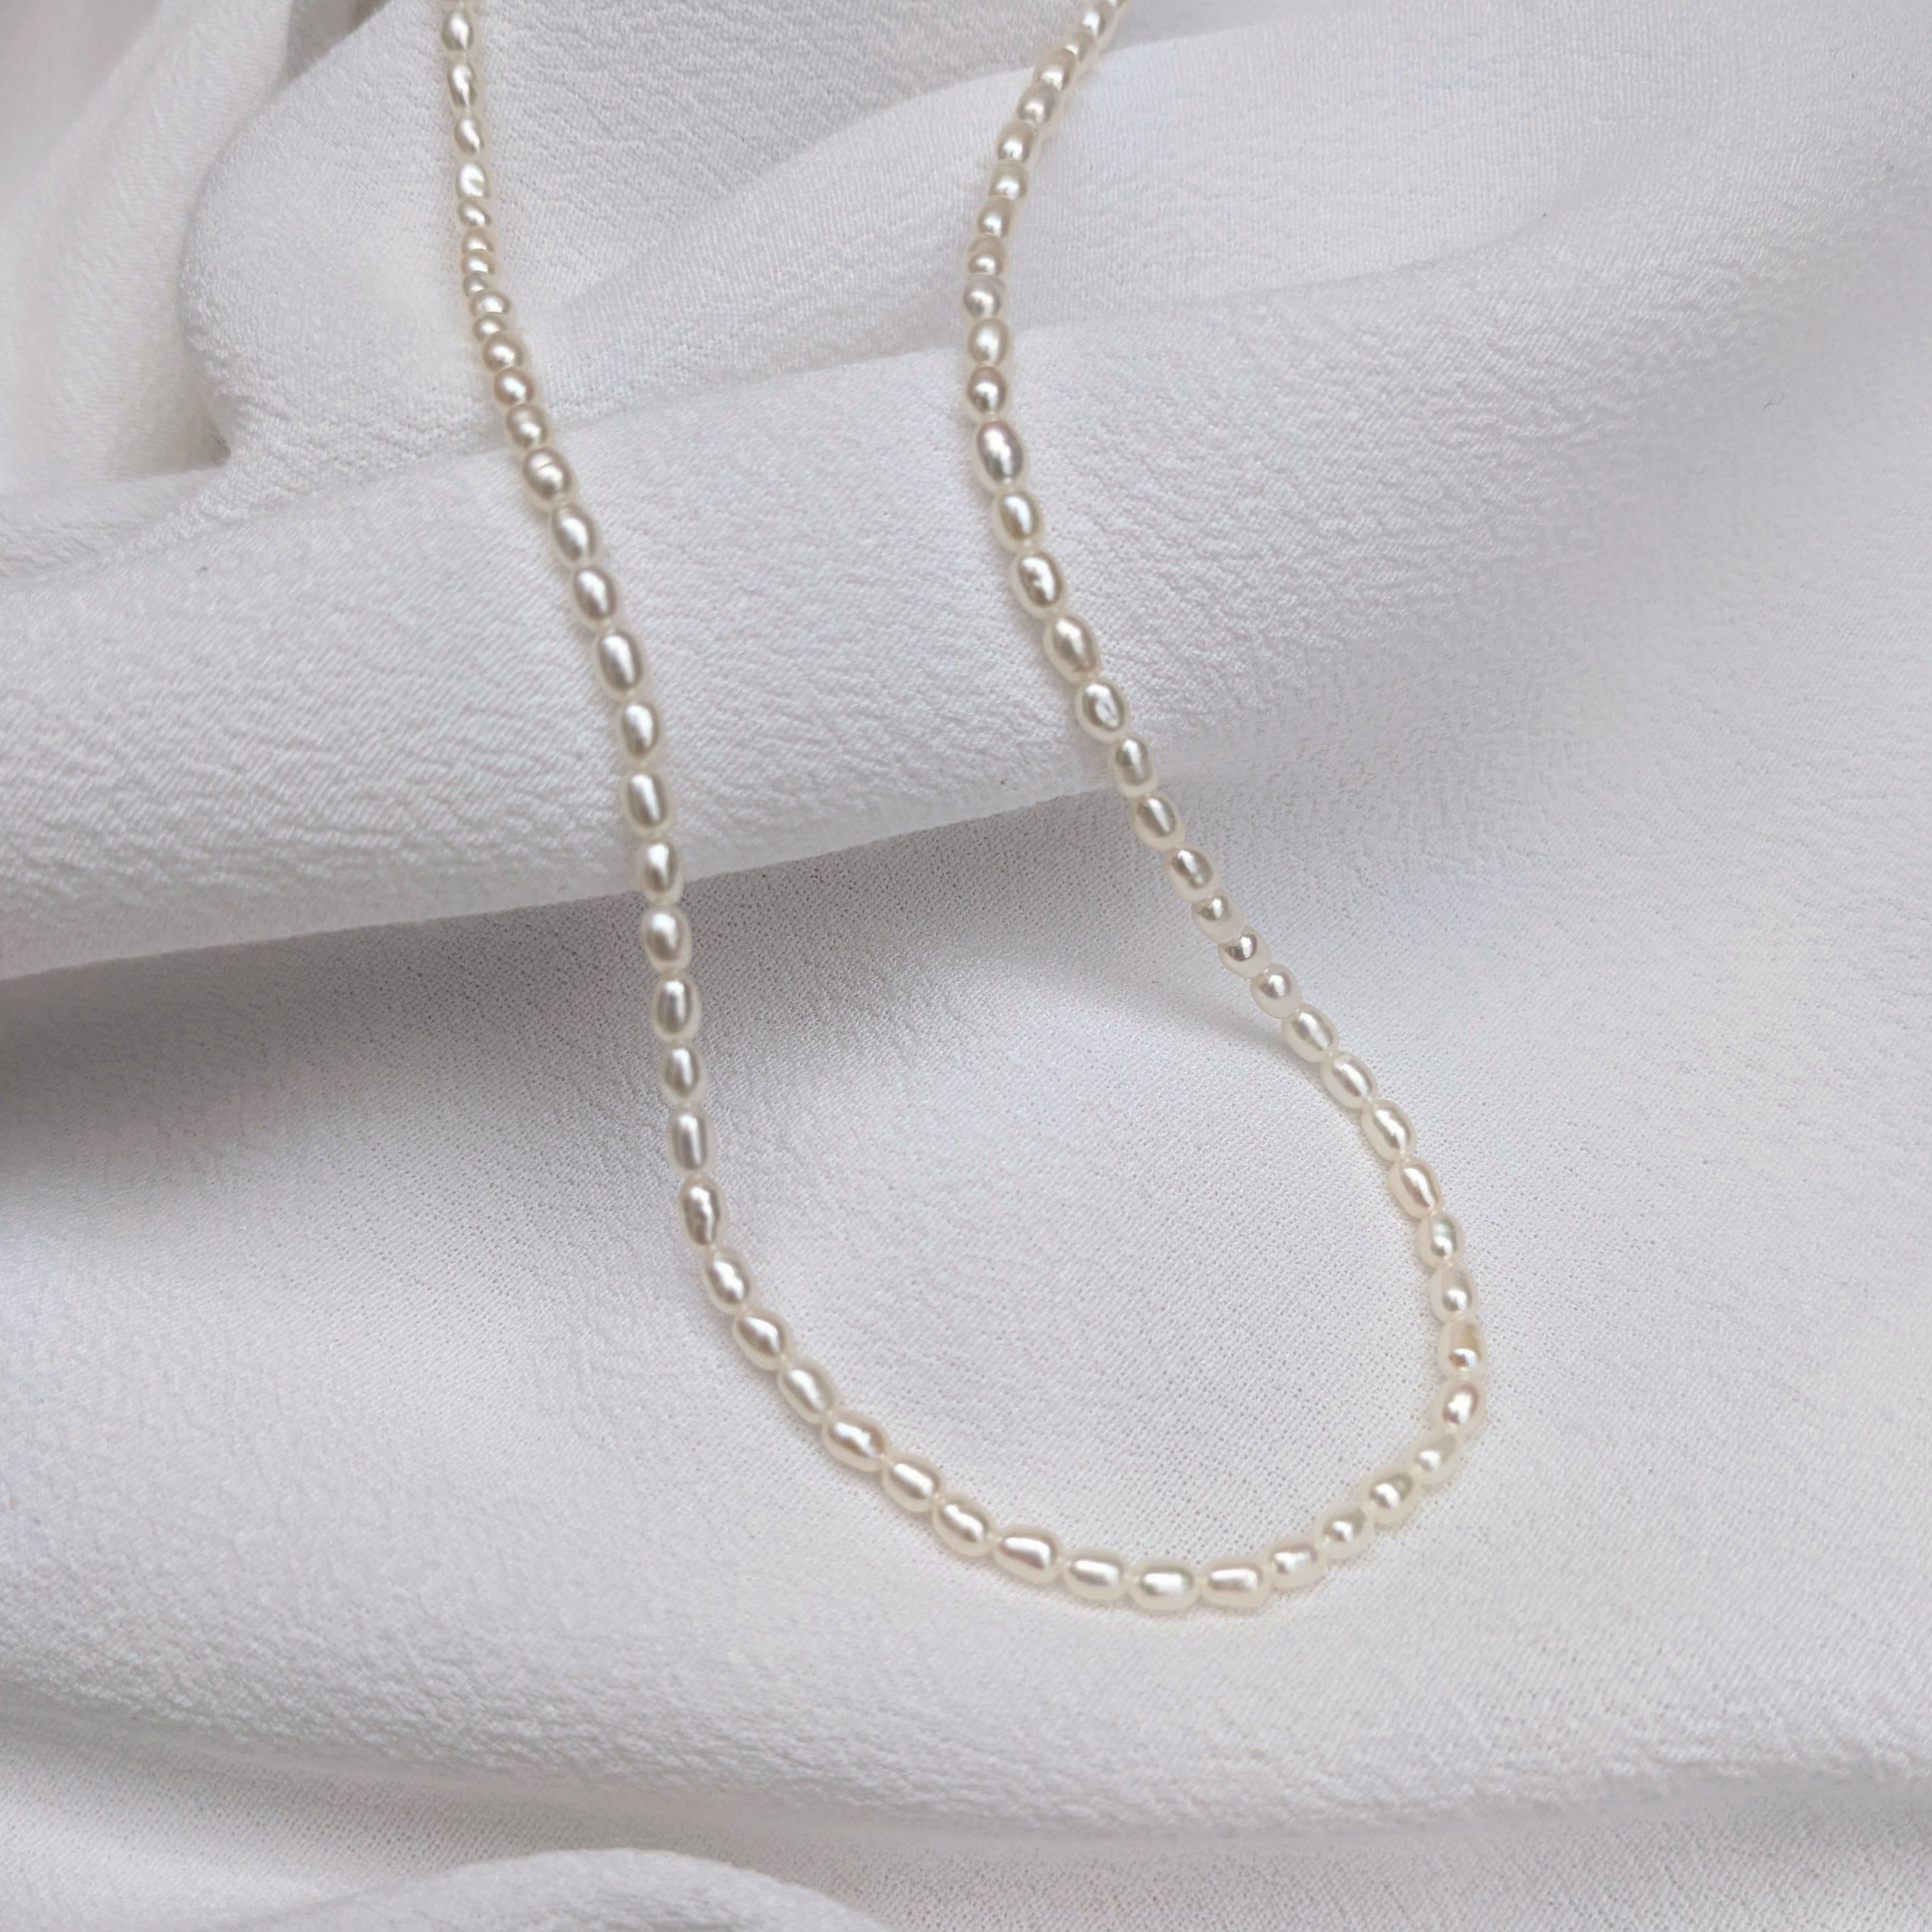 Small pearl necklace draped over white fabric